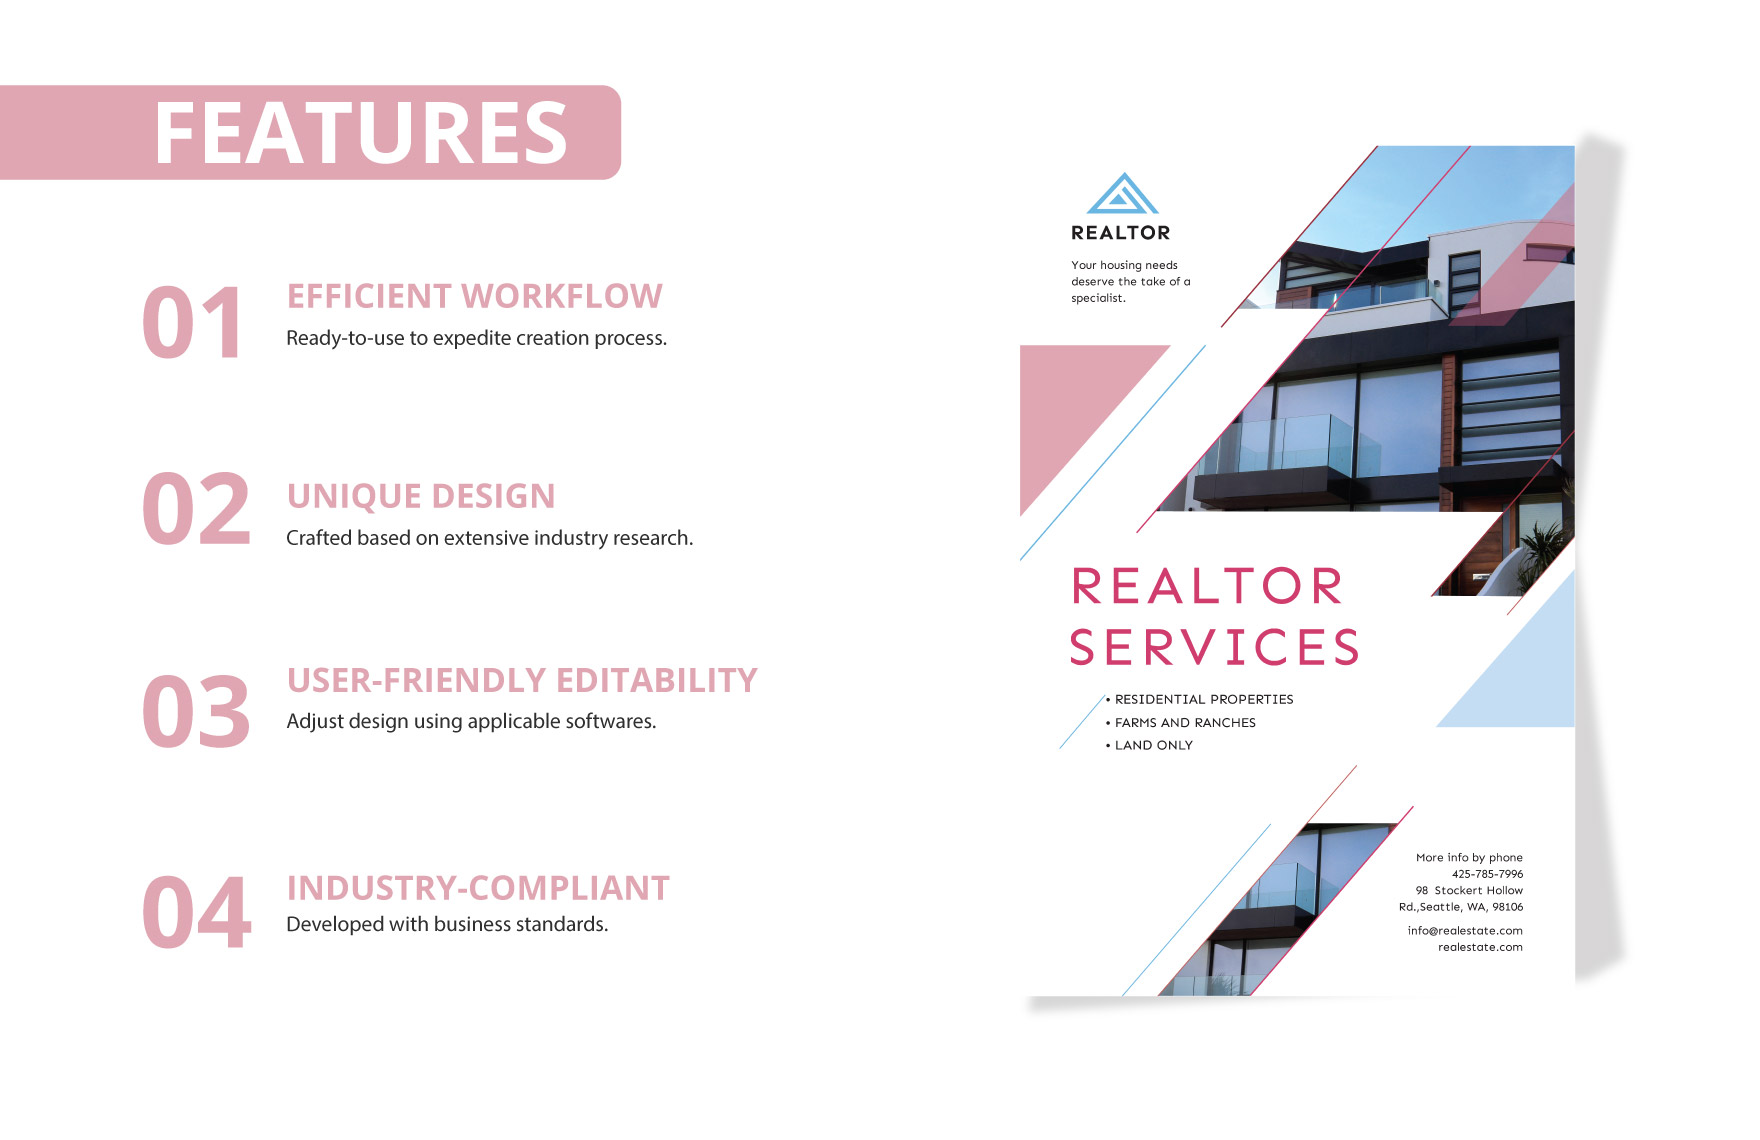 Real Estate Agent/Realtor Poster Template